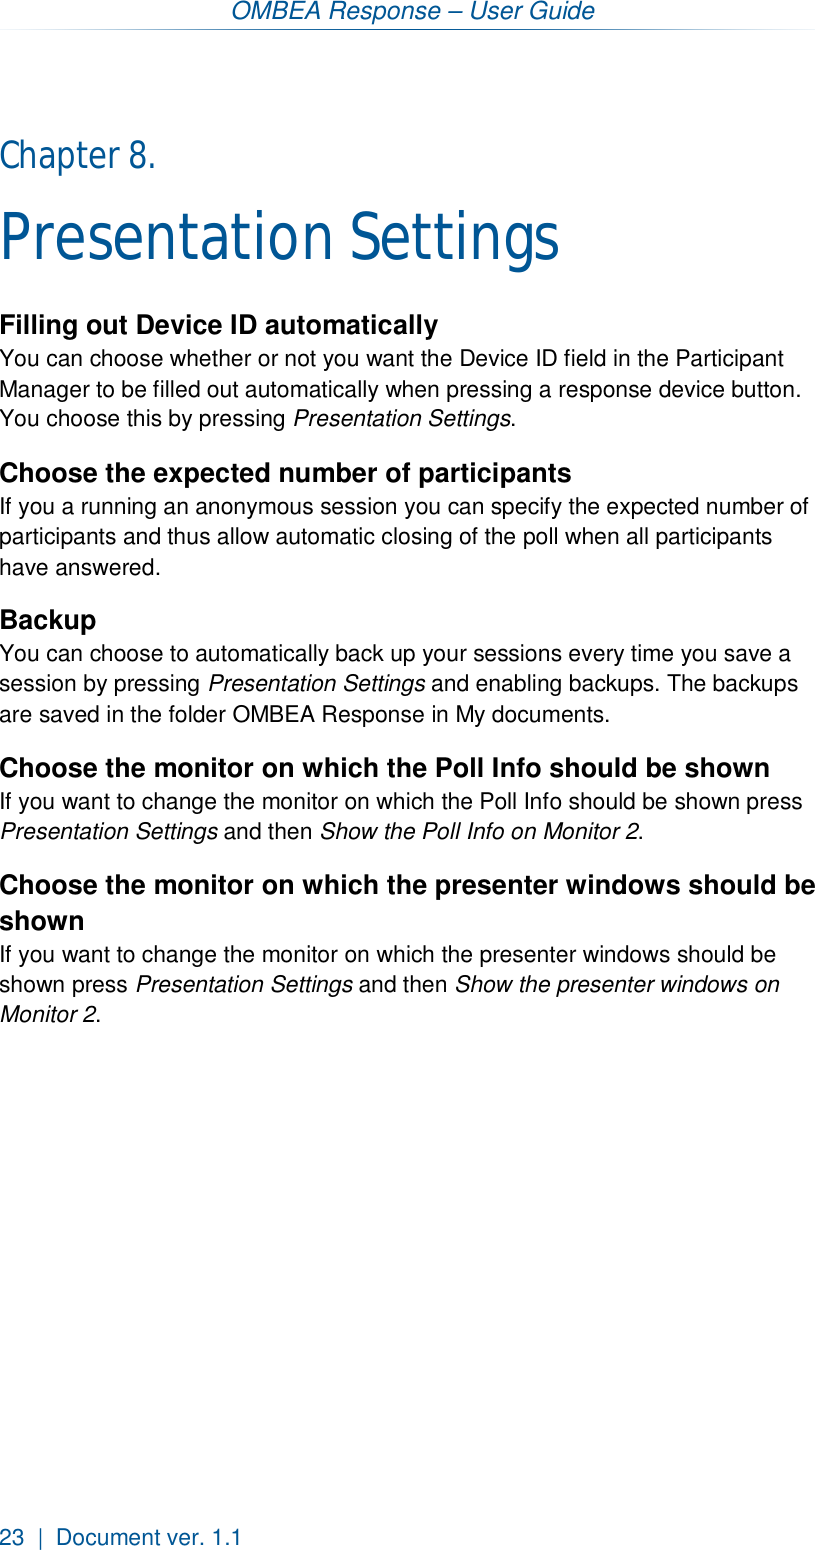 OMBEA Response – User Guide 23  |  Document ver. 1.1  Chapter 8.  Presentation Settings Filling out Device ID automatically You can choose whether or not you want the Device ID field in the Participant Manager to be filled out automatically when pressing a response device button. You choose this by pressing Presentation Settings.  Choose the expected number of participants If you a running an anonymous session you can specify the expected number of participants and thus allow automatic closing of the poll when all participants have answered. Backup You can choose to automatically back up your sessions every time you save a session by pressing Presentation Settings and enabling backups. The backups are saved in the folder OMBEA Response in My documents. Choose the monitor on which the Poll Info should be shown If you want to change the monitor on which the Poll Info should be shown press Presentation Settings and then Show the Poll Info on Monitor 2. Choose the monitor on which the presenter windows should be shown If you want to change the monitor on which the presenter windows should be shown press Presentation Settings and then Show the presenter windows on Monitor 2. 